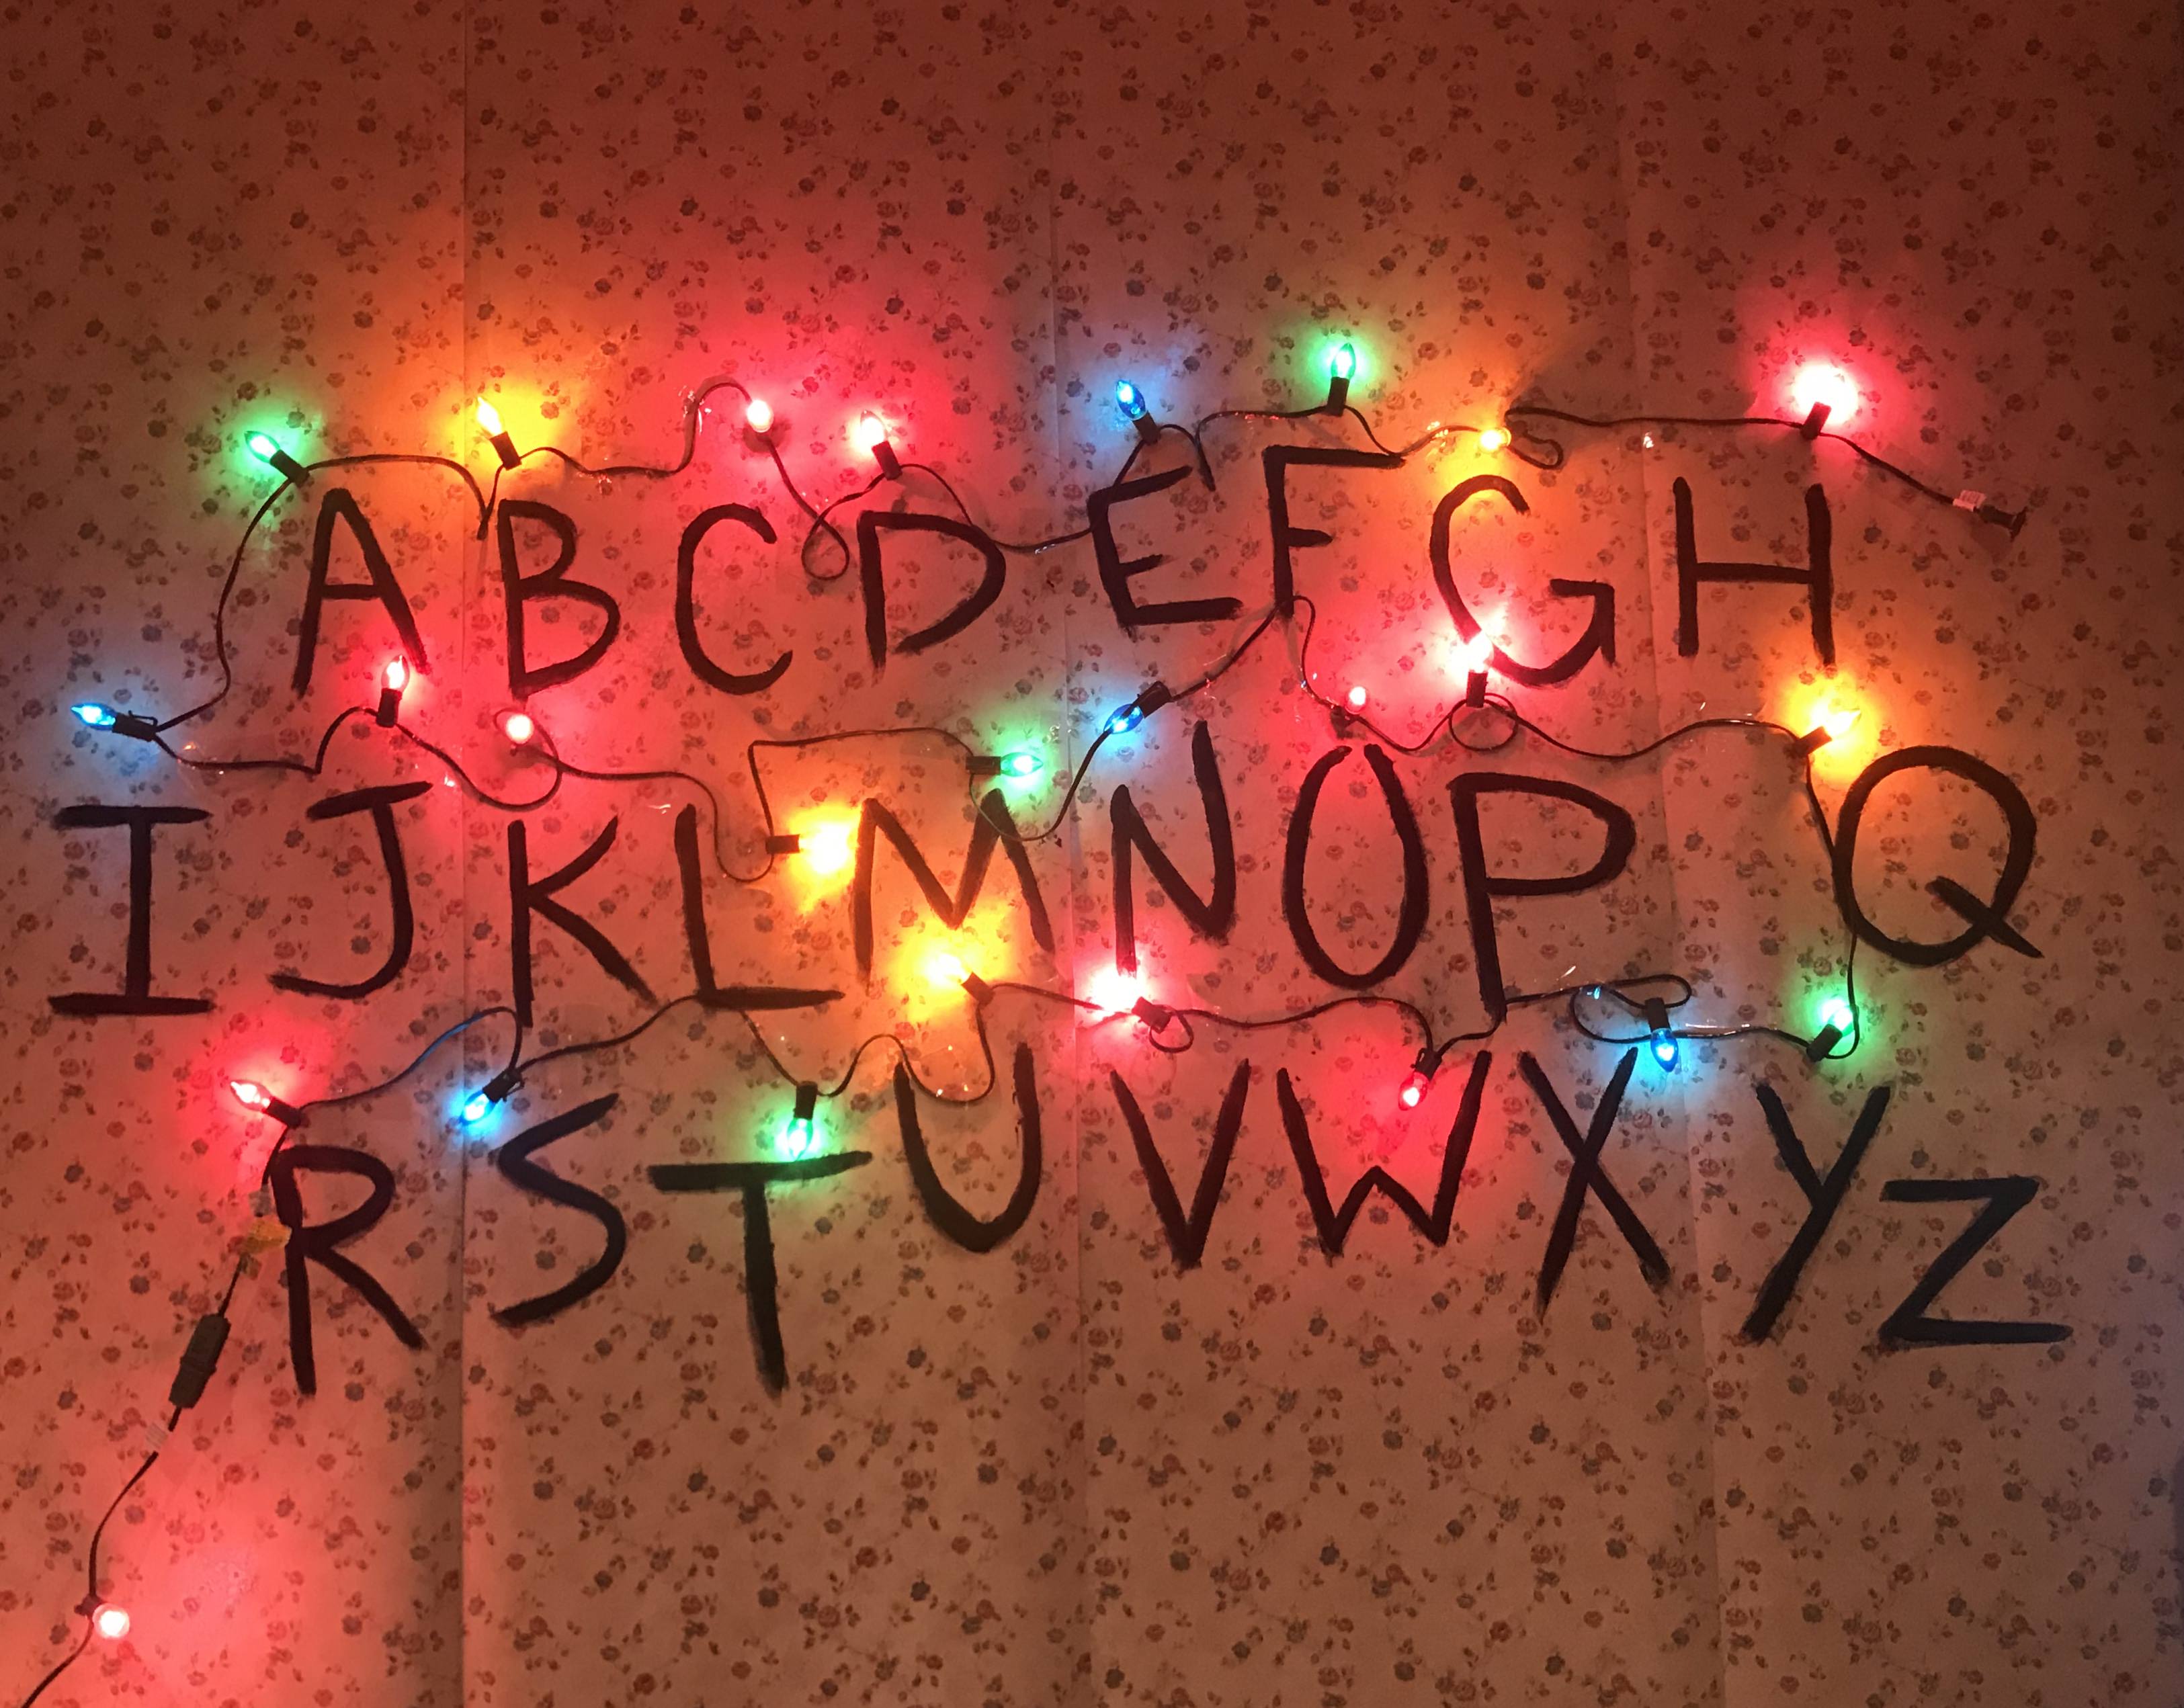 We hosted a Stranger Things themed party for Halloween